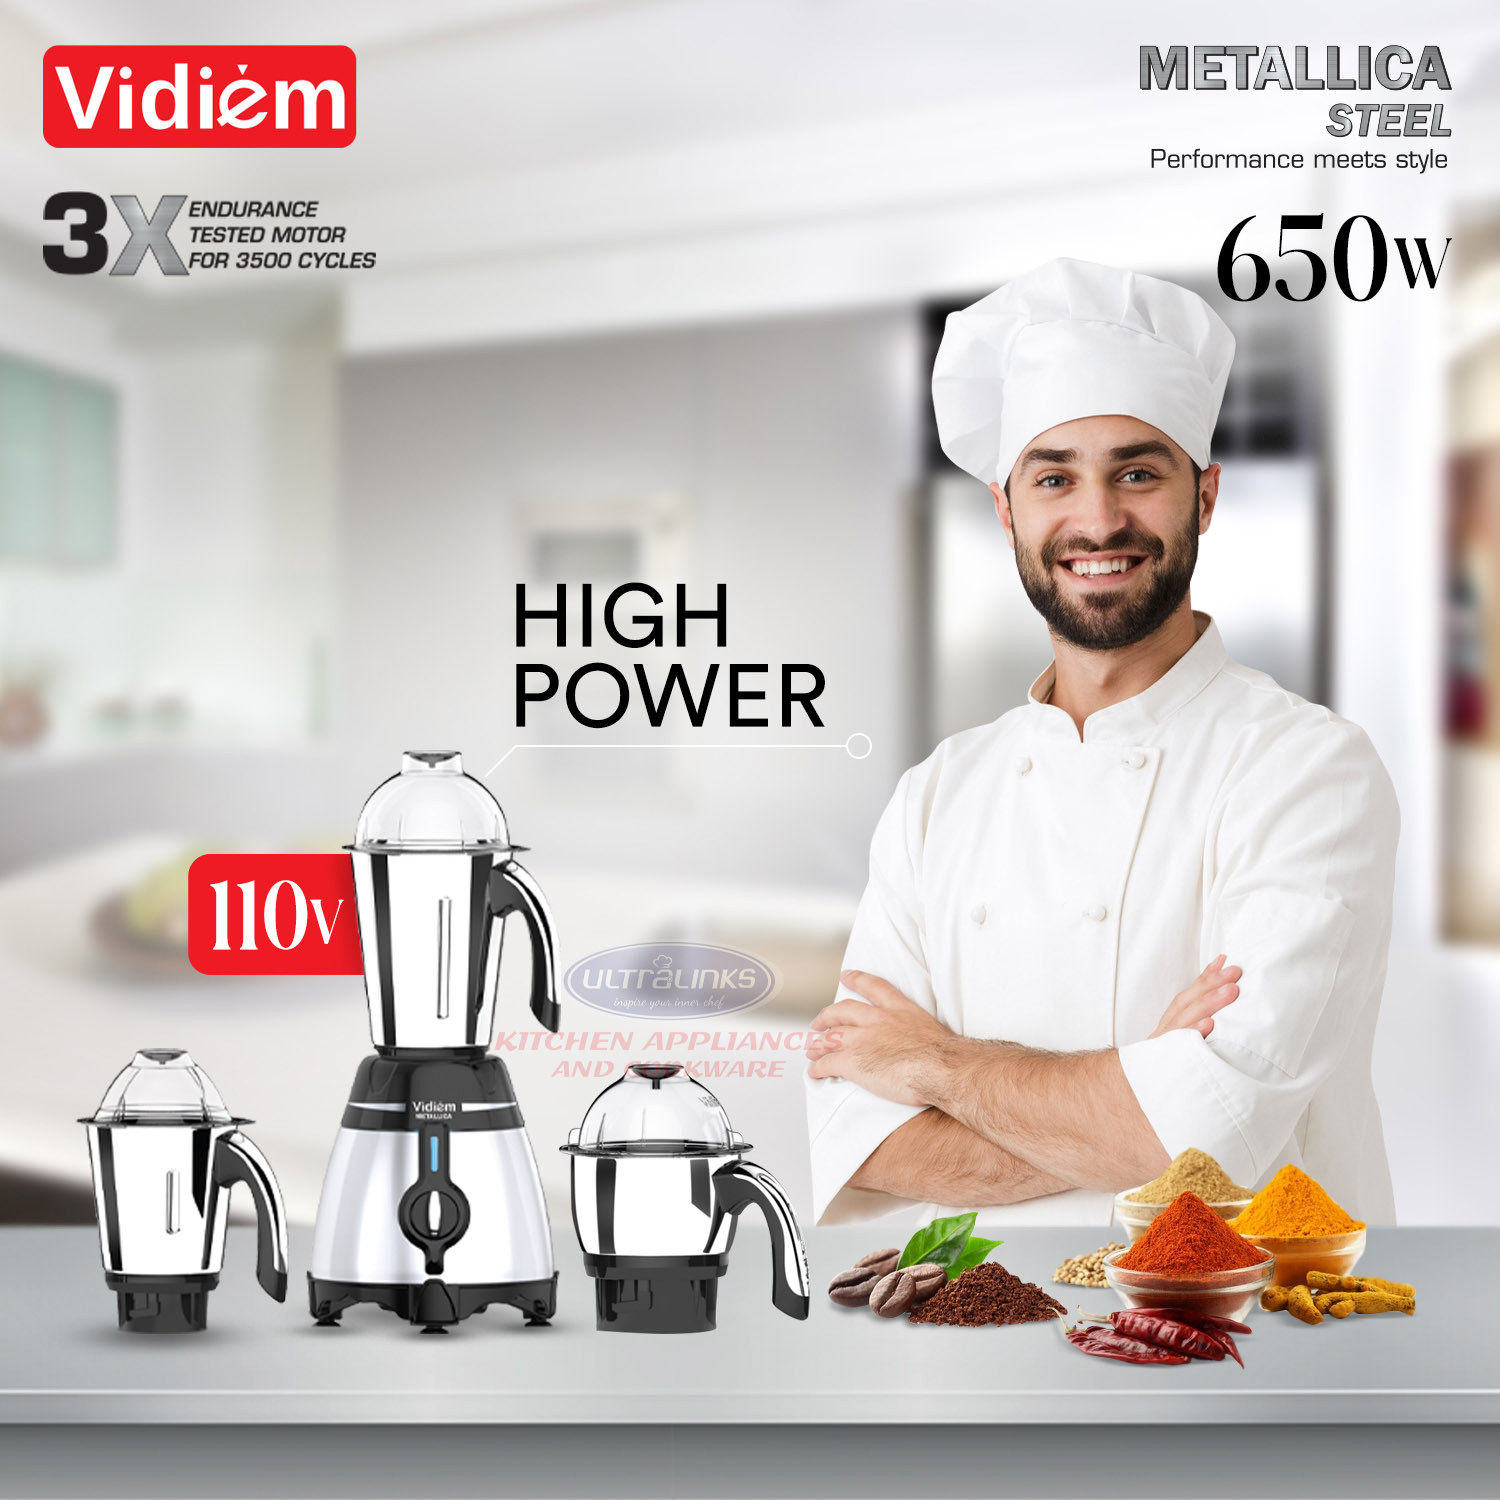 vidiem-metallica-steele-650w-110v-stainless-steel-jars-indian-mixer-grinder-with-spice-coffee-grinder-jar-for-use-in-canada-usa